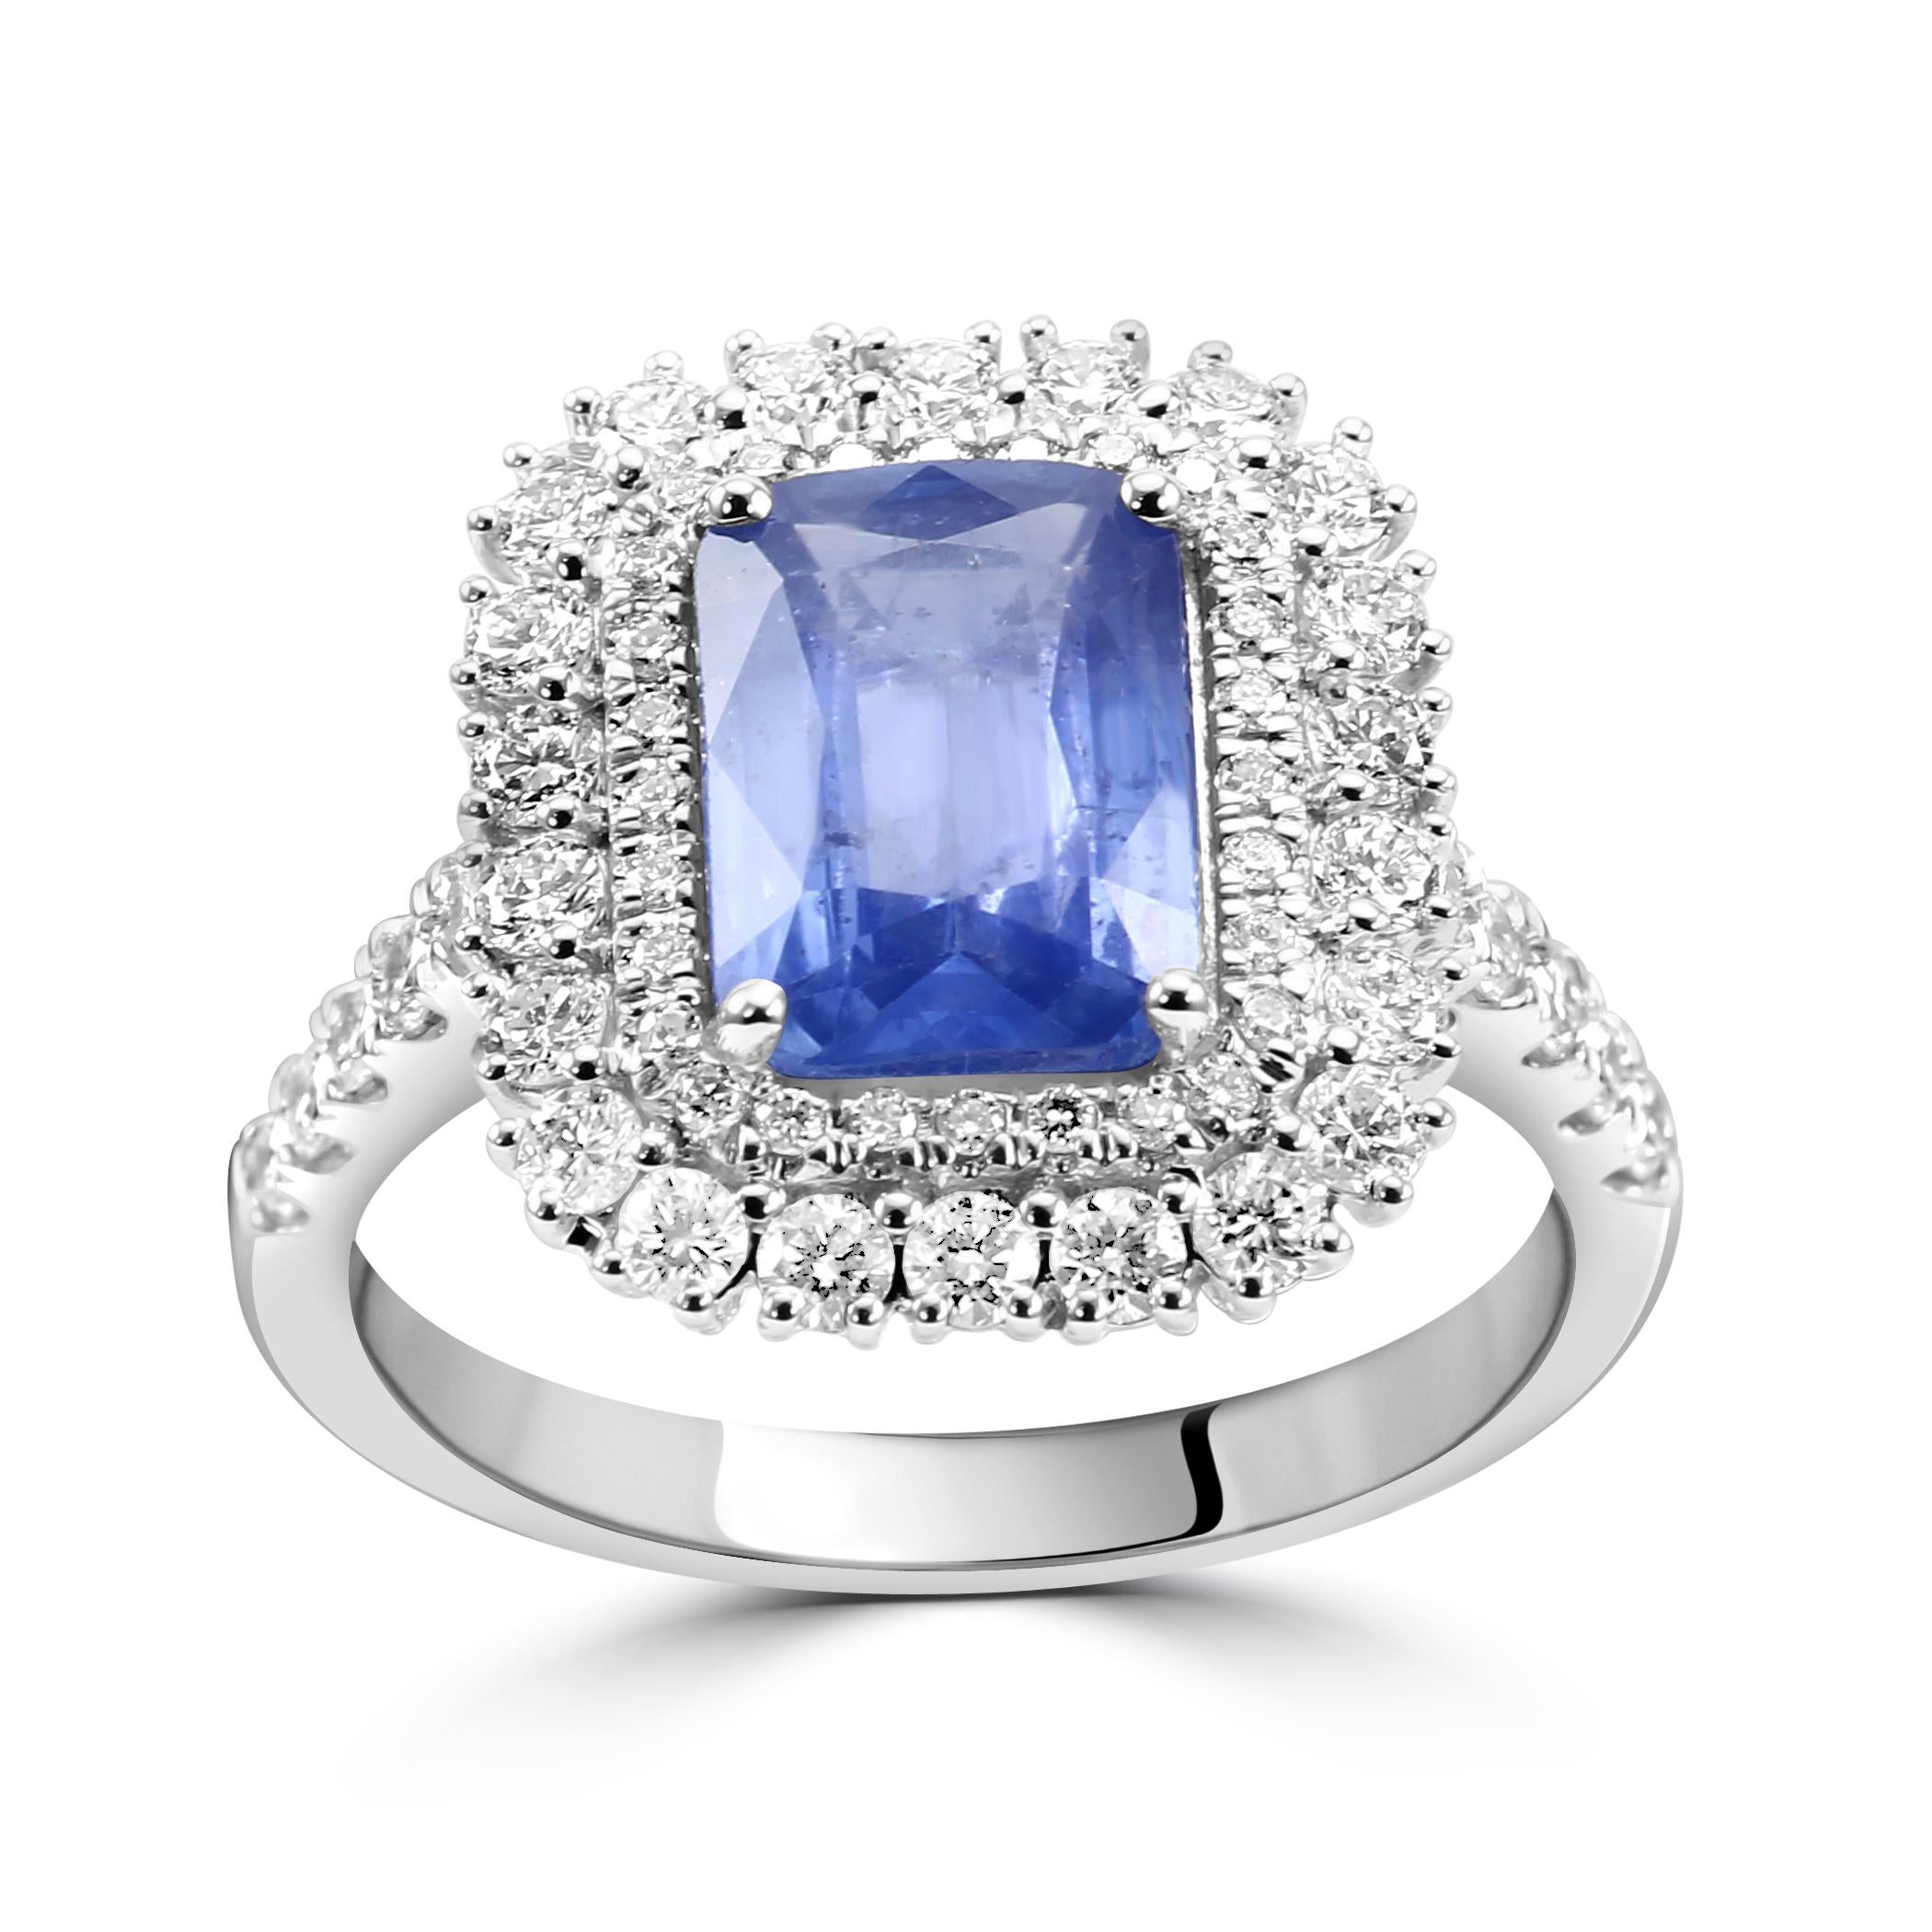 Celebrate your love story with our breathtaking bridal radiant cut Ceylon Sapphire ring. 

The focal point of this exquisite ring is the radiant-cut Ceylon Sapphire, chosen for its captivating deep blue hue and impressive size of 2.62 carats.